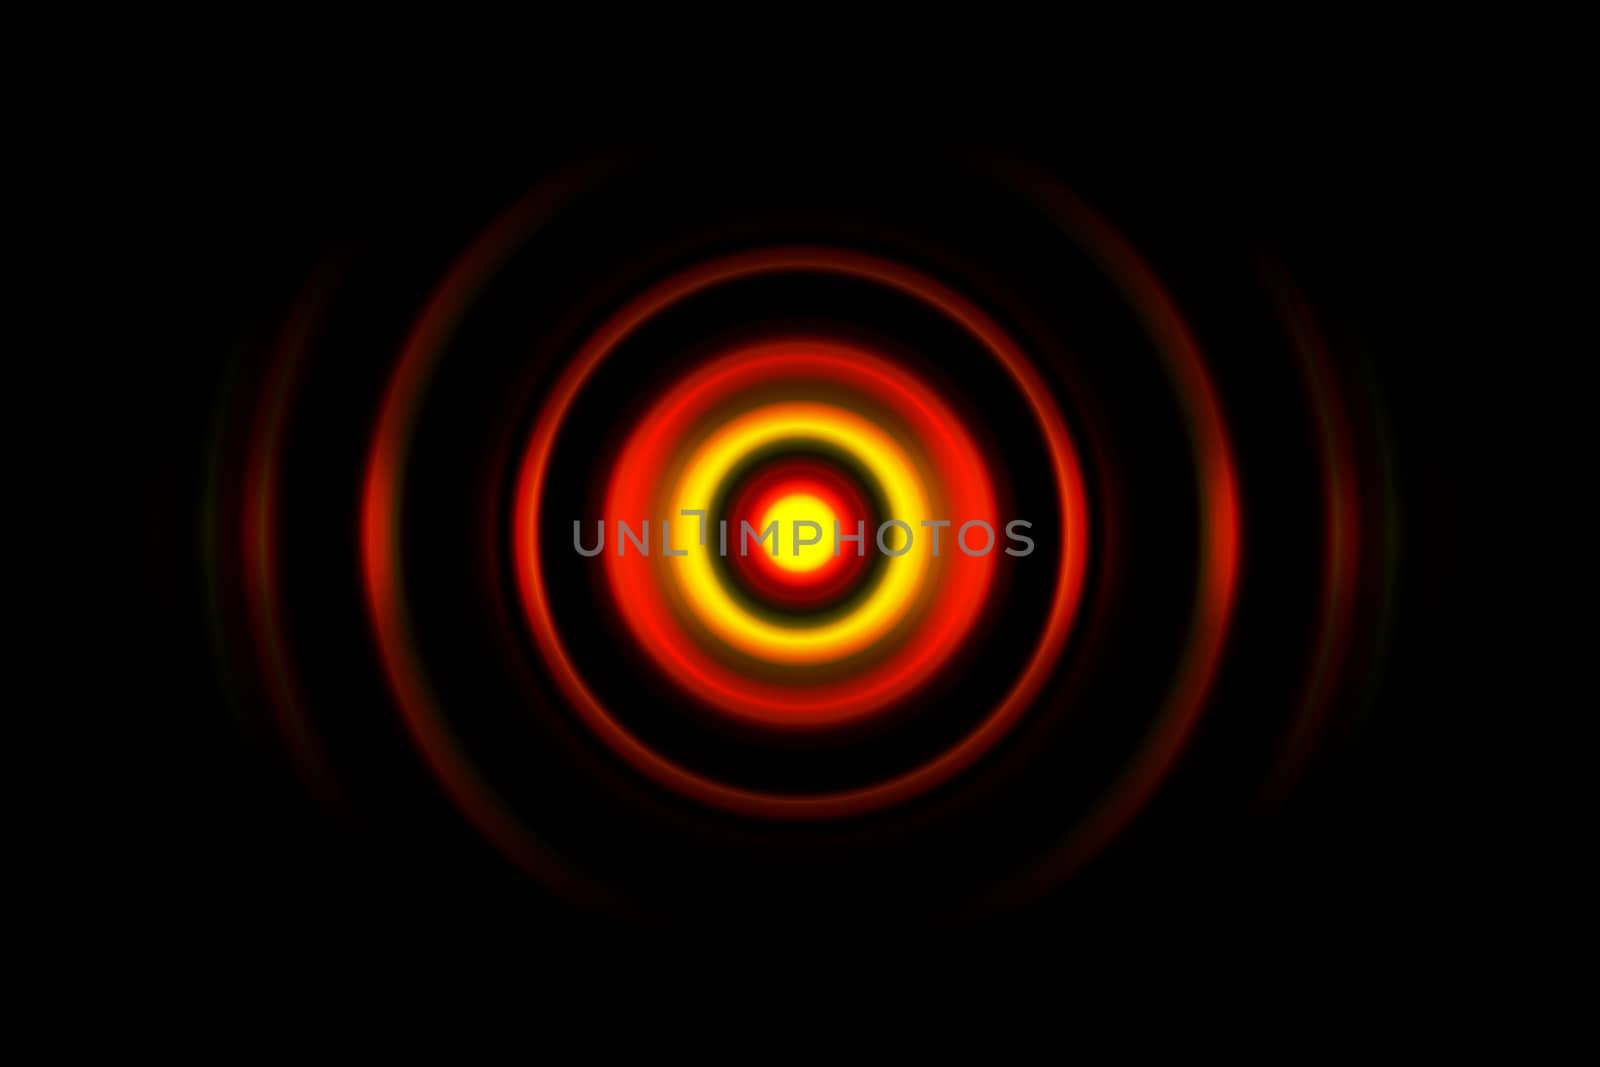 Red digital sound wave or circle signal, abstract background by mouu007